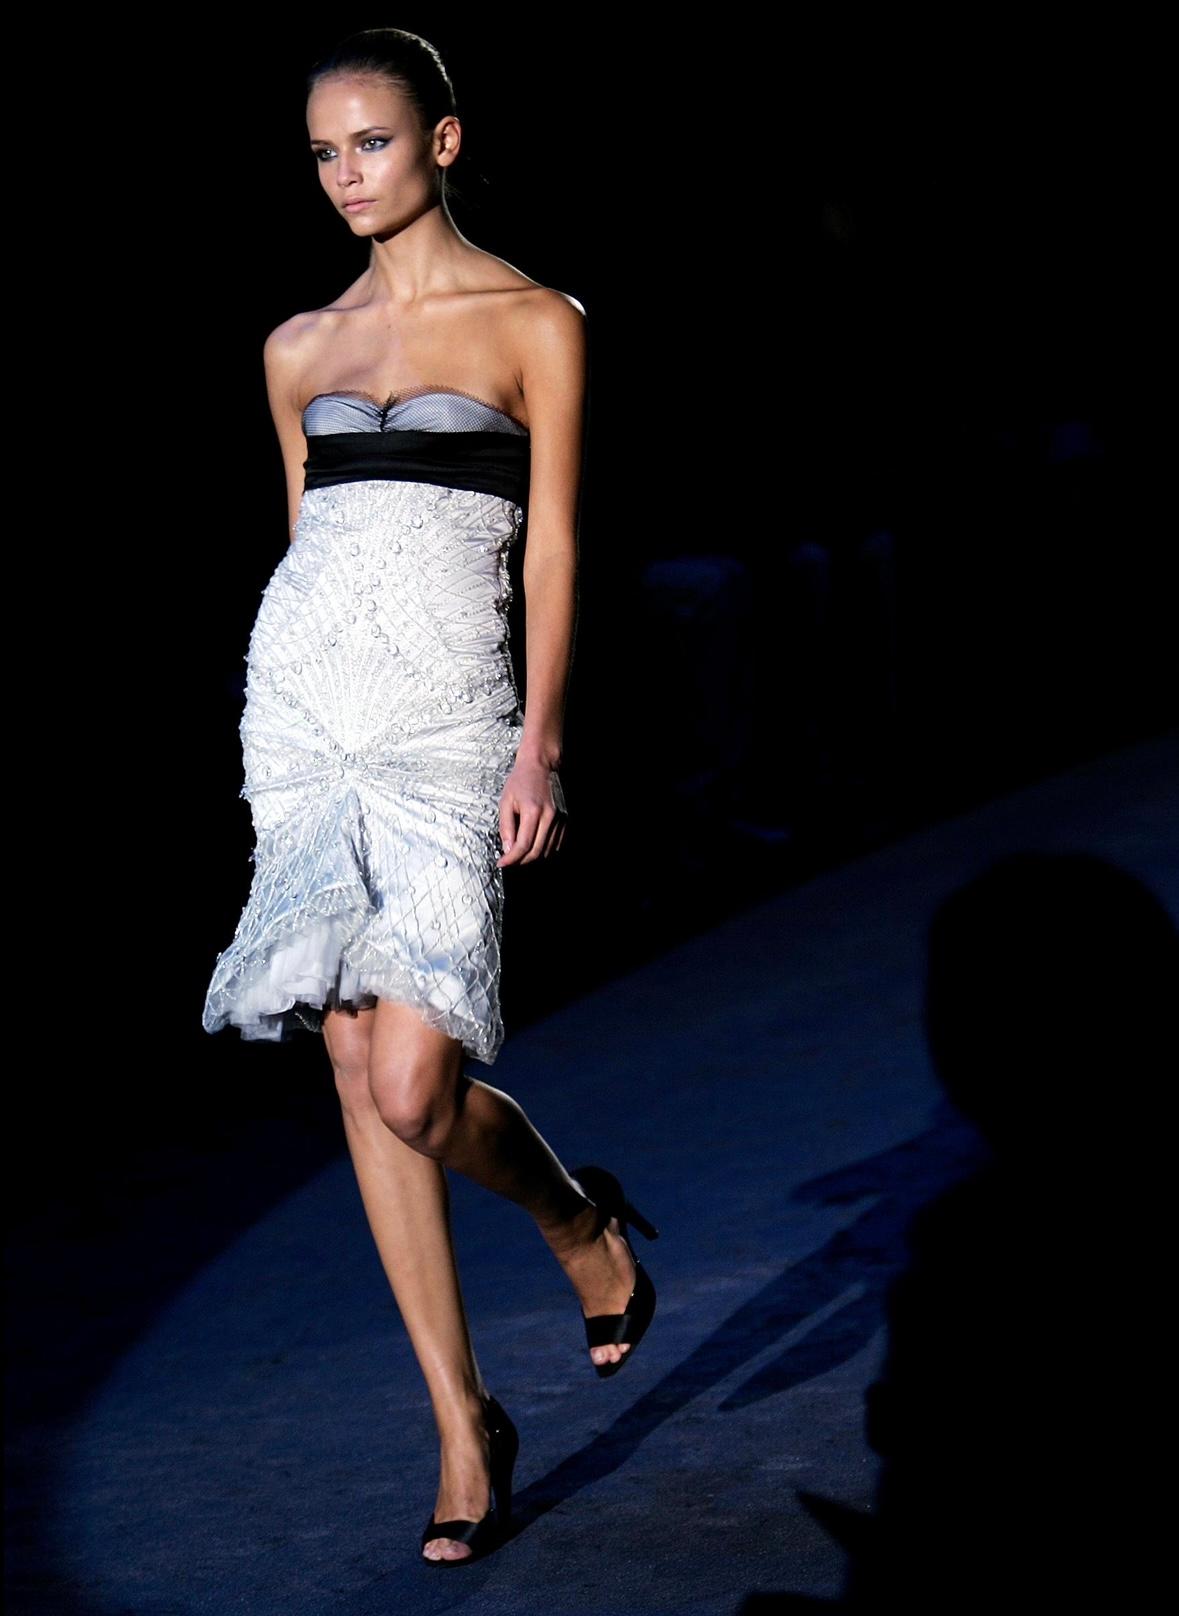 Presenting an incredible silver and black embroidered strapless Gucci dress designed by Alessandra Facchinetti. From the Fall/Winter 2005 collection, this dress debuted as part of look 38, modeled by Natasha Poly, and was also highlighted in the